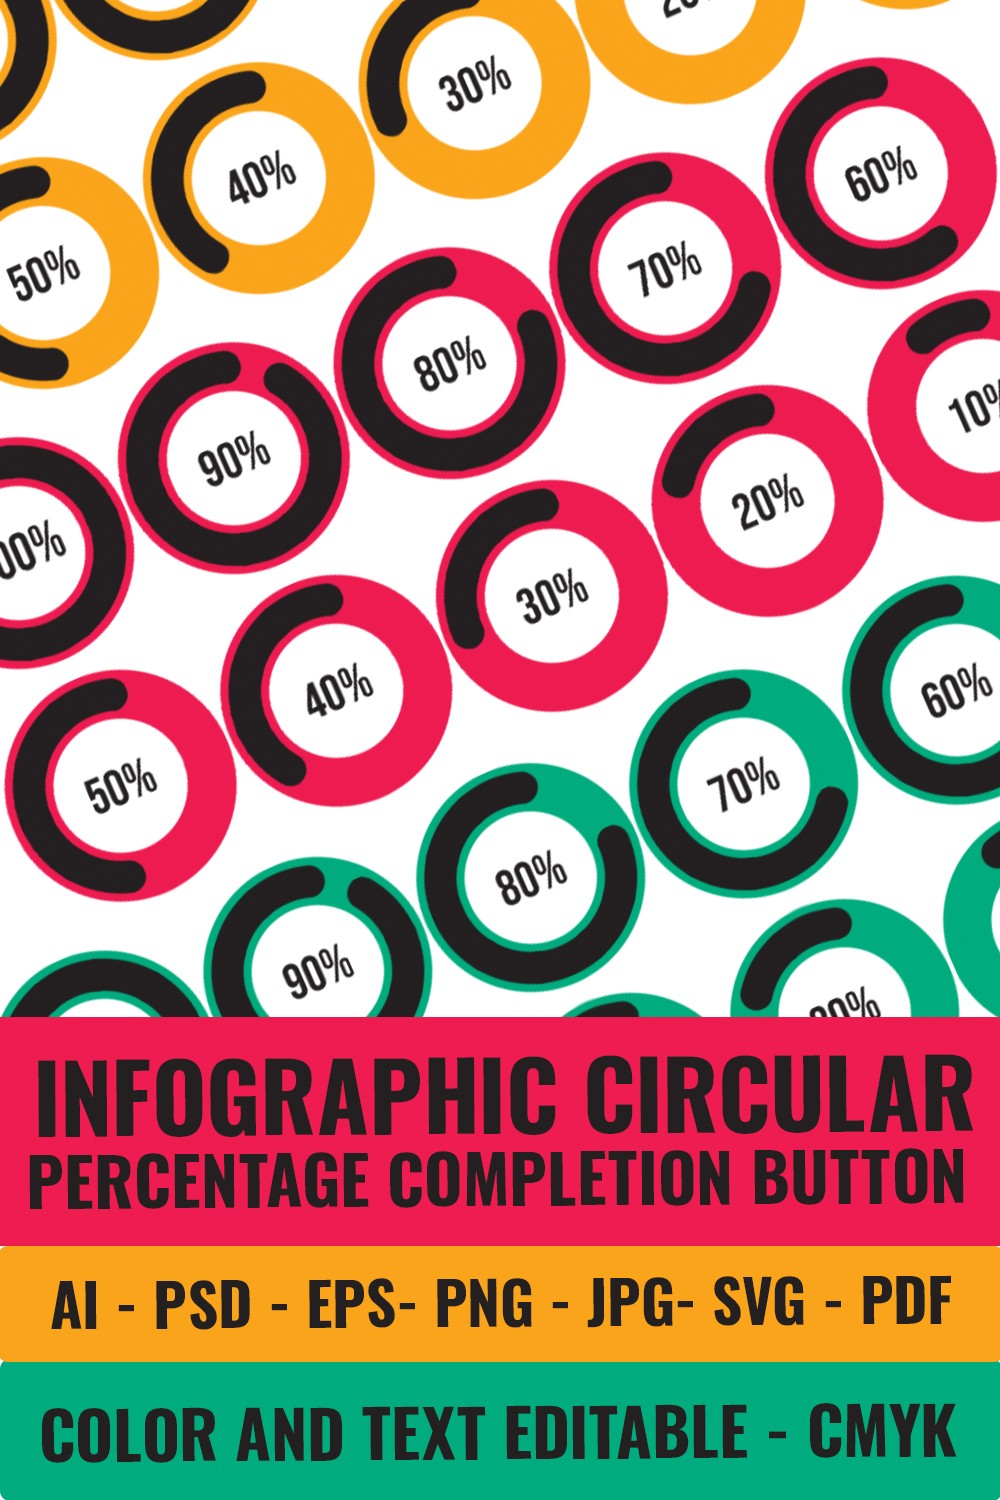 pinterest Infographic Circular Percentage Completion Button.